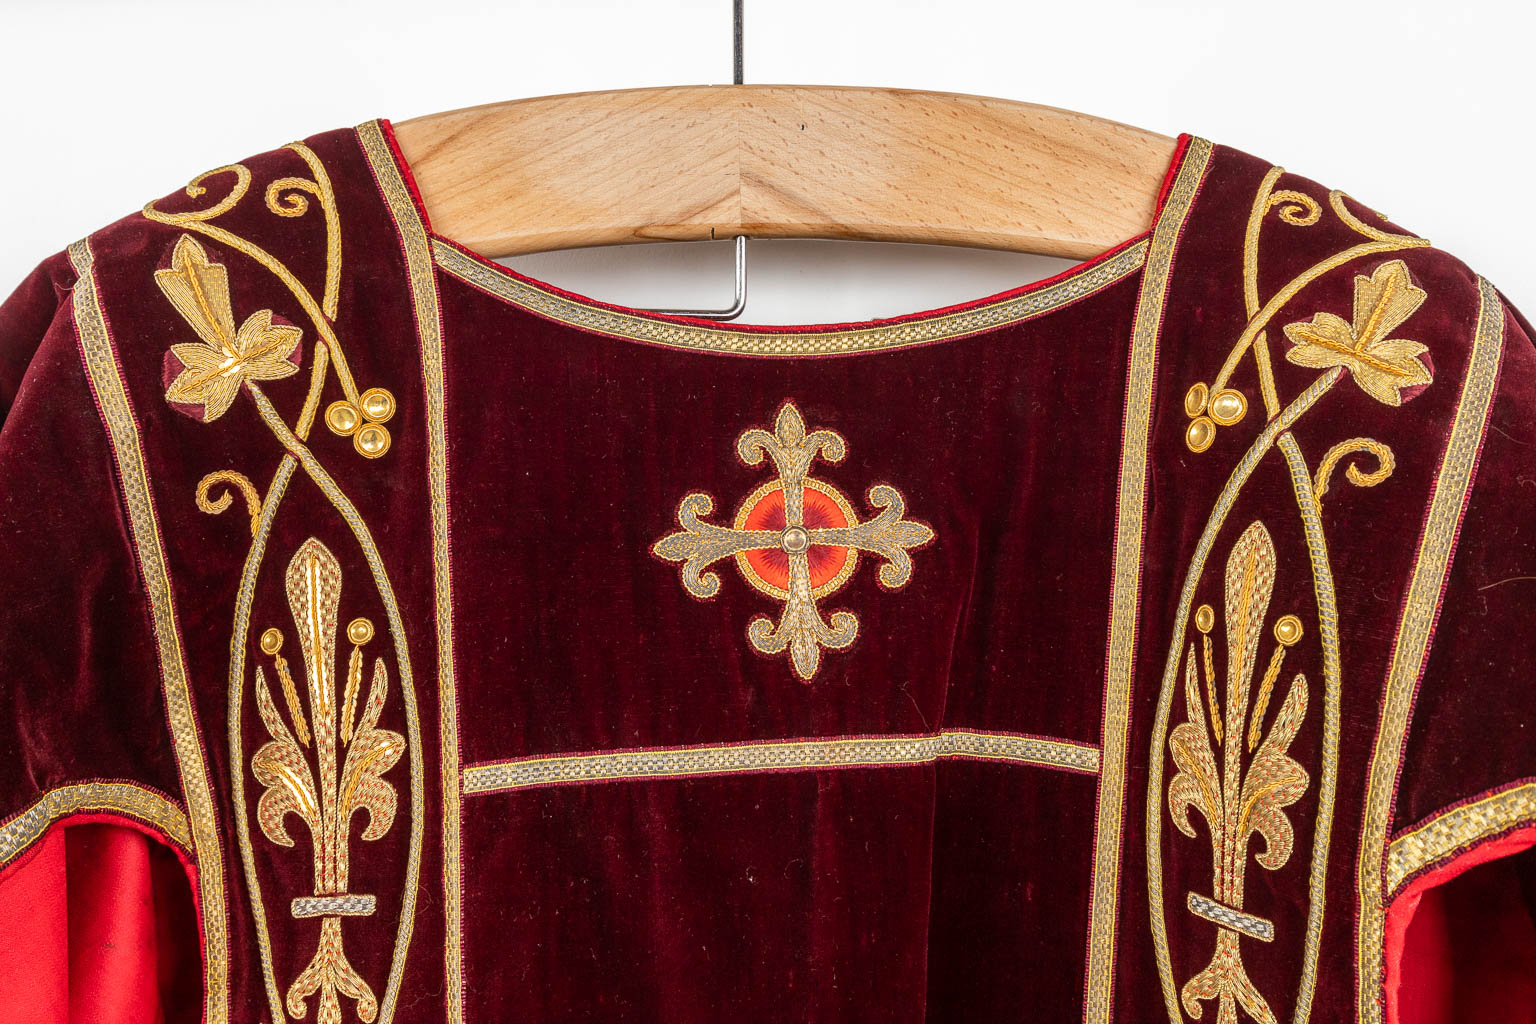 Two Dalmatics and Two Roman Chasubles, thick gold thread embroideries.